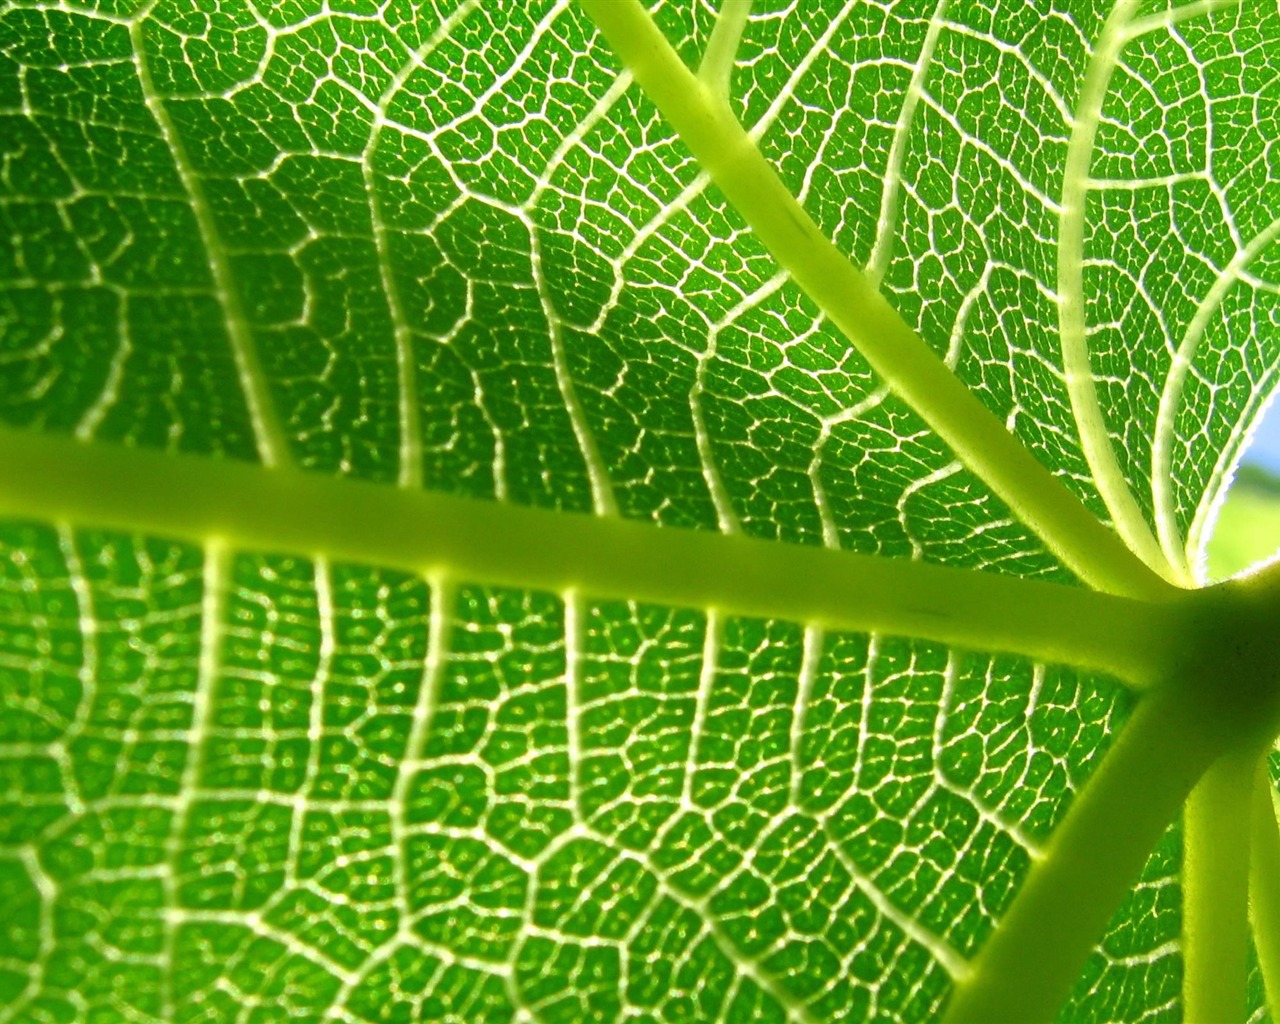 Large green leaves close-up flower wallpaper (2) #13 - 1280x1024